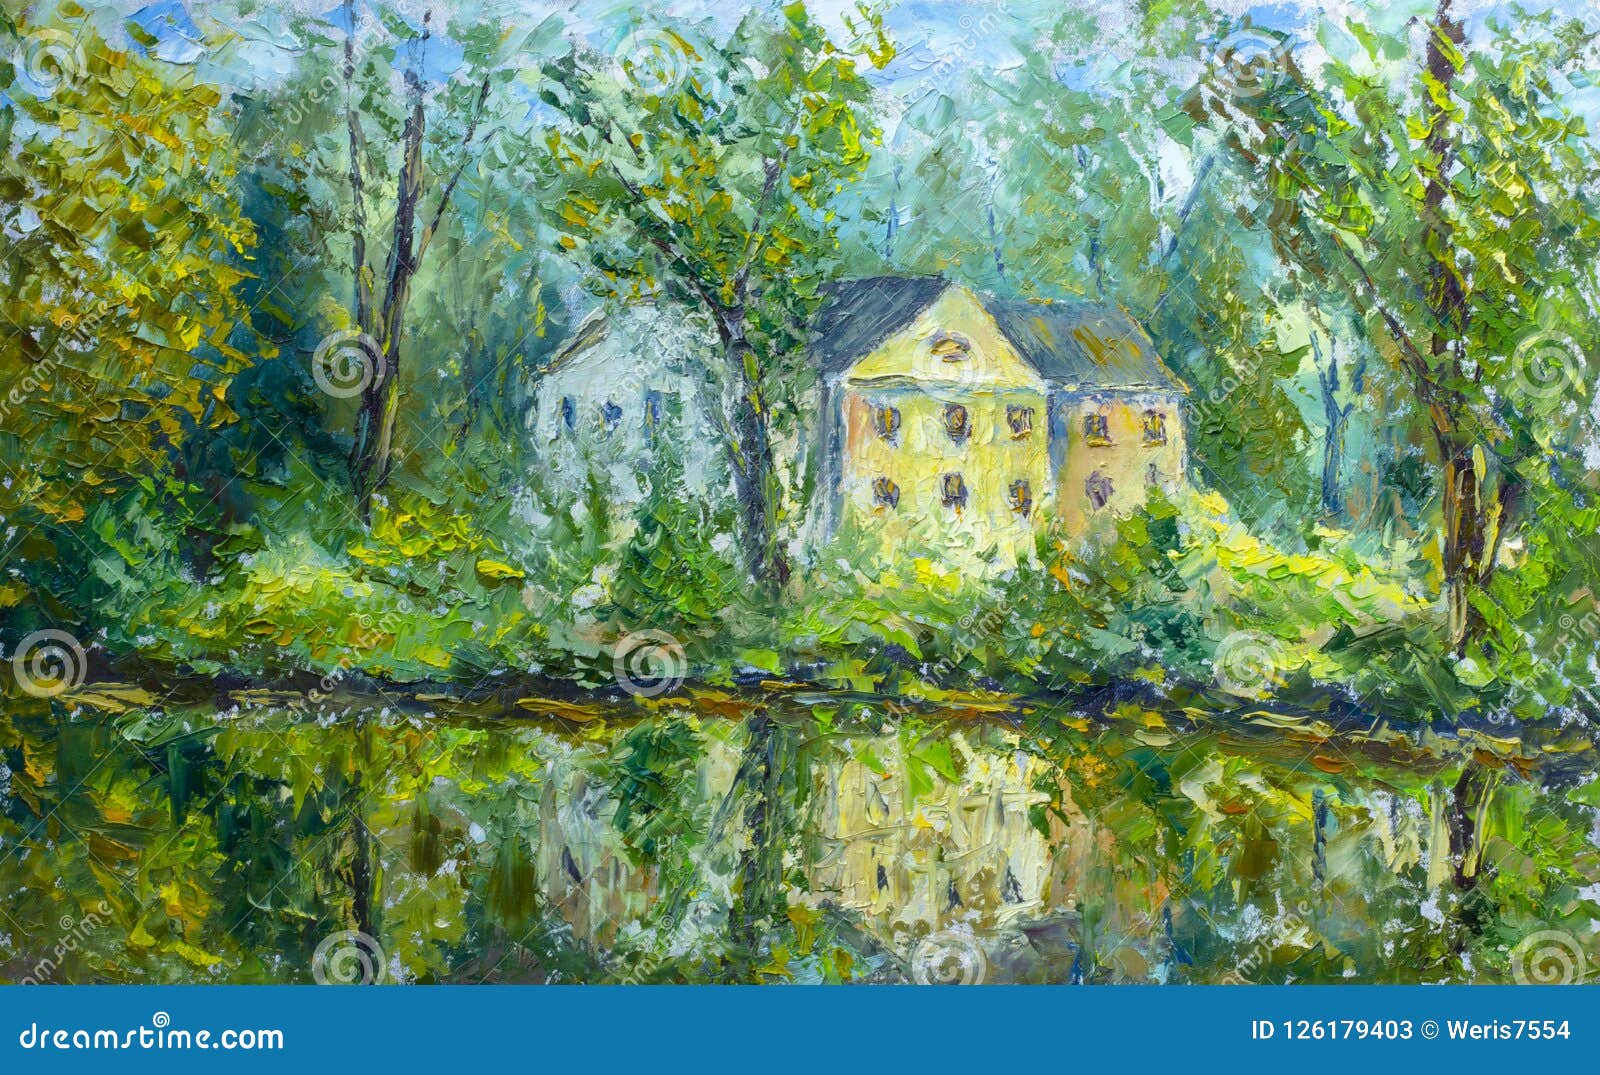 landscape painting original oil painting Oil painting impasto painting green art